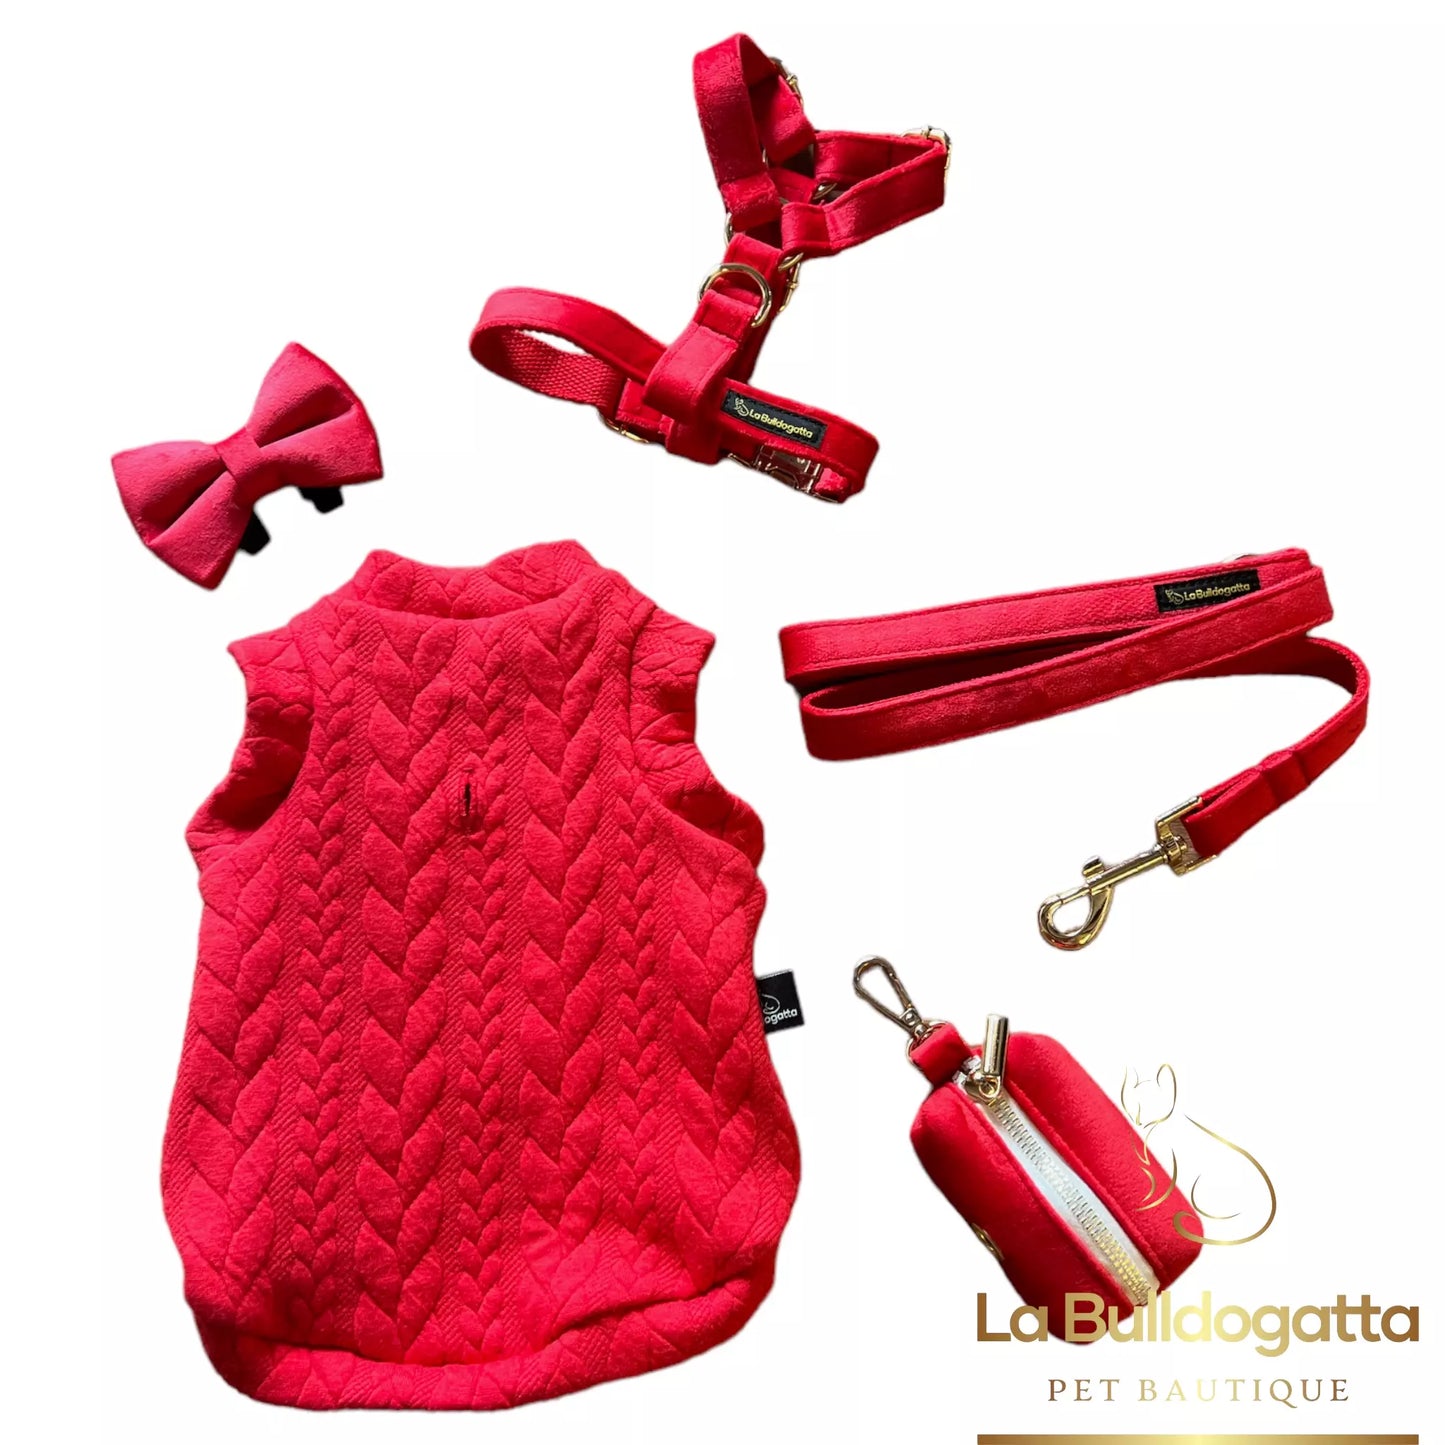 H-shaped harness, leash and red velvet bow set